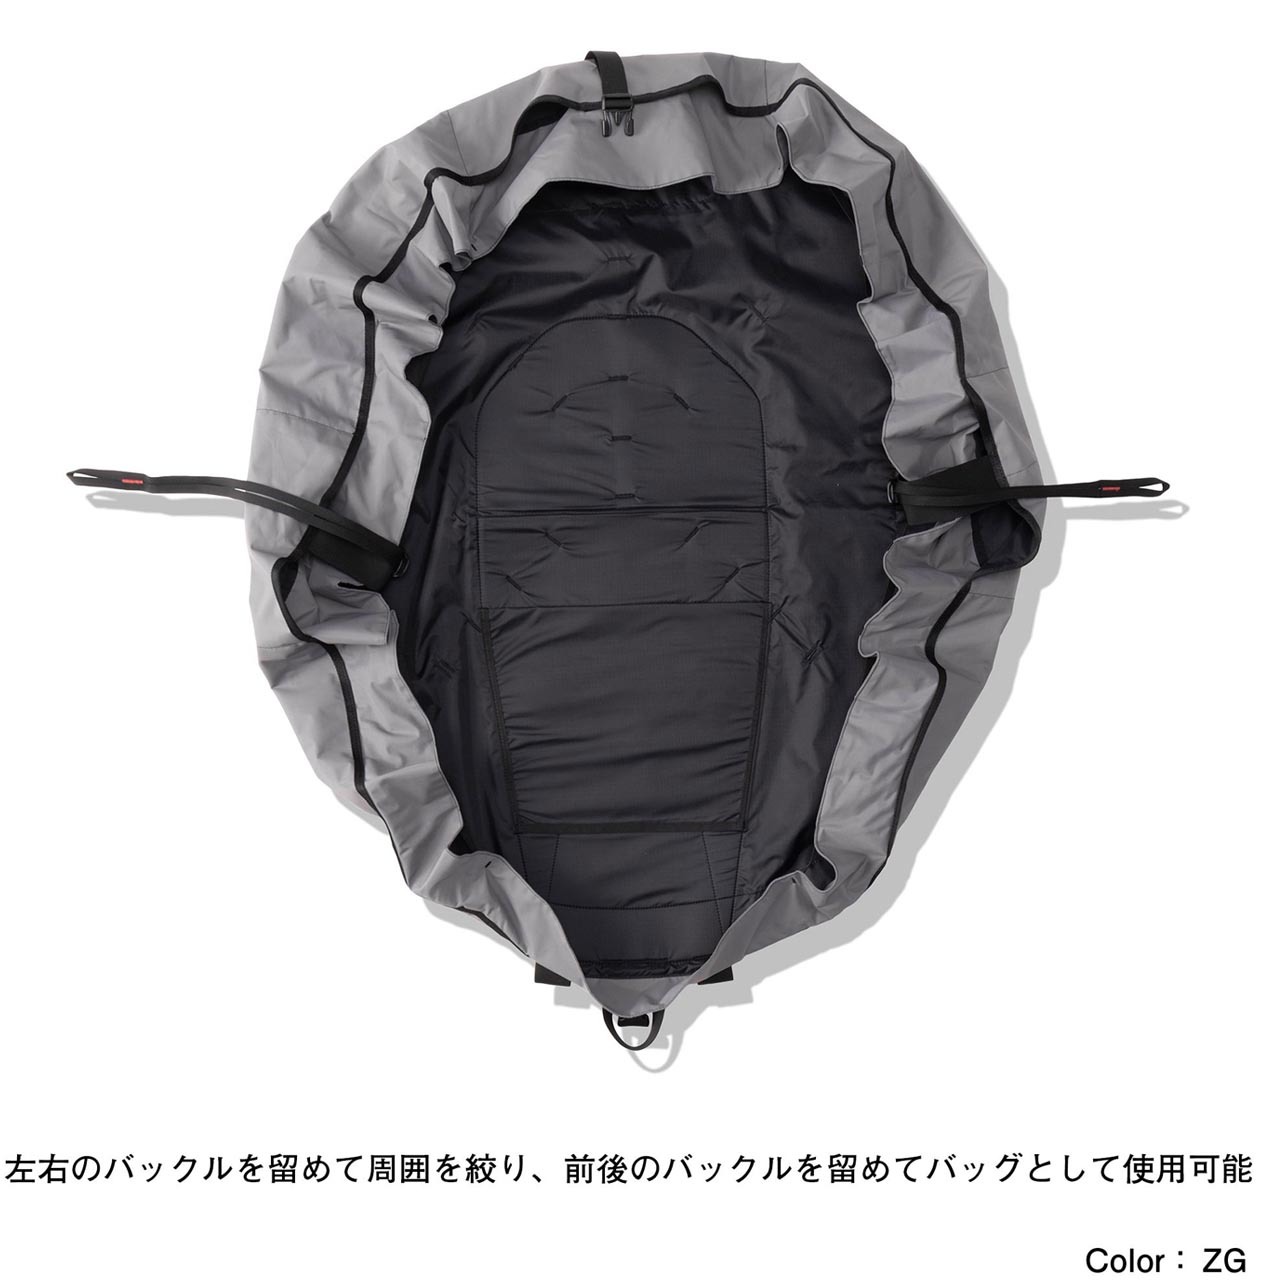 THE NORTH FACE [ザ・ノース・フェイス] Escape Pack [NM82230]_f0051306_08001443.jpg